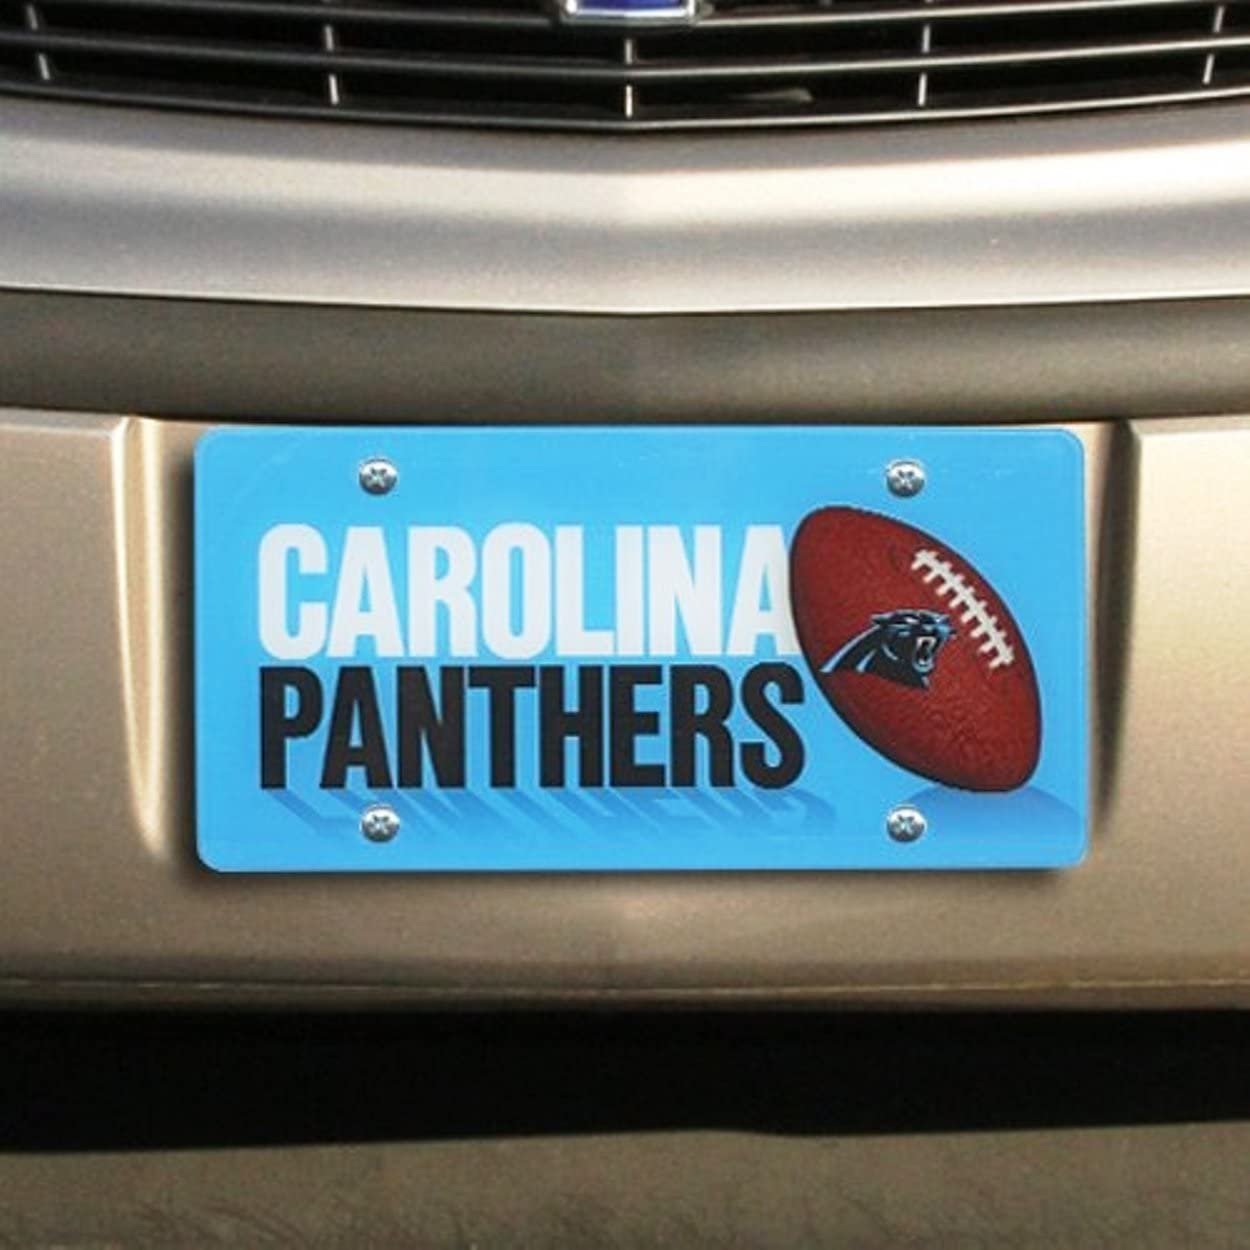 Carolina Panthers Laser Tag License Plate, Mirrored Acrylic Printed, 6x12 Inch